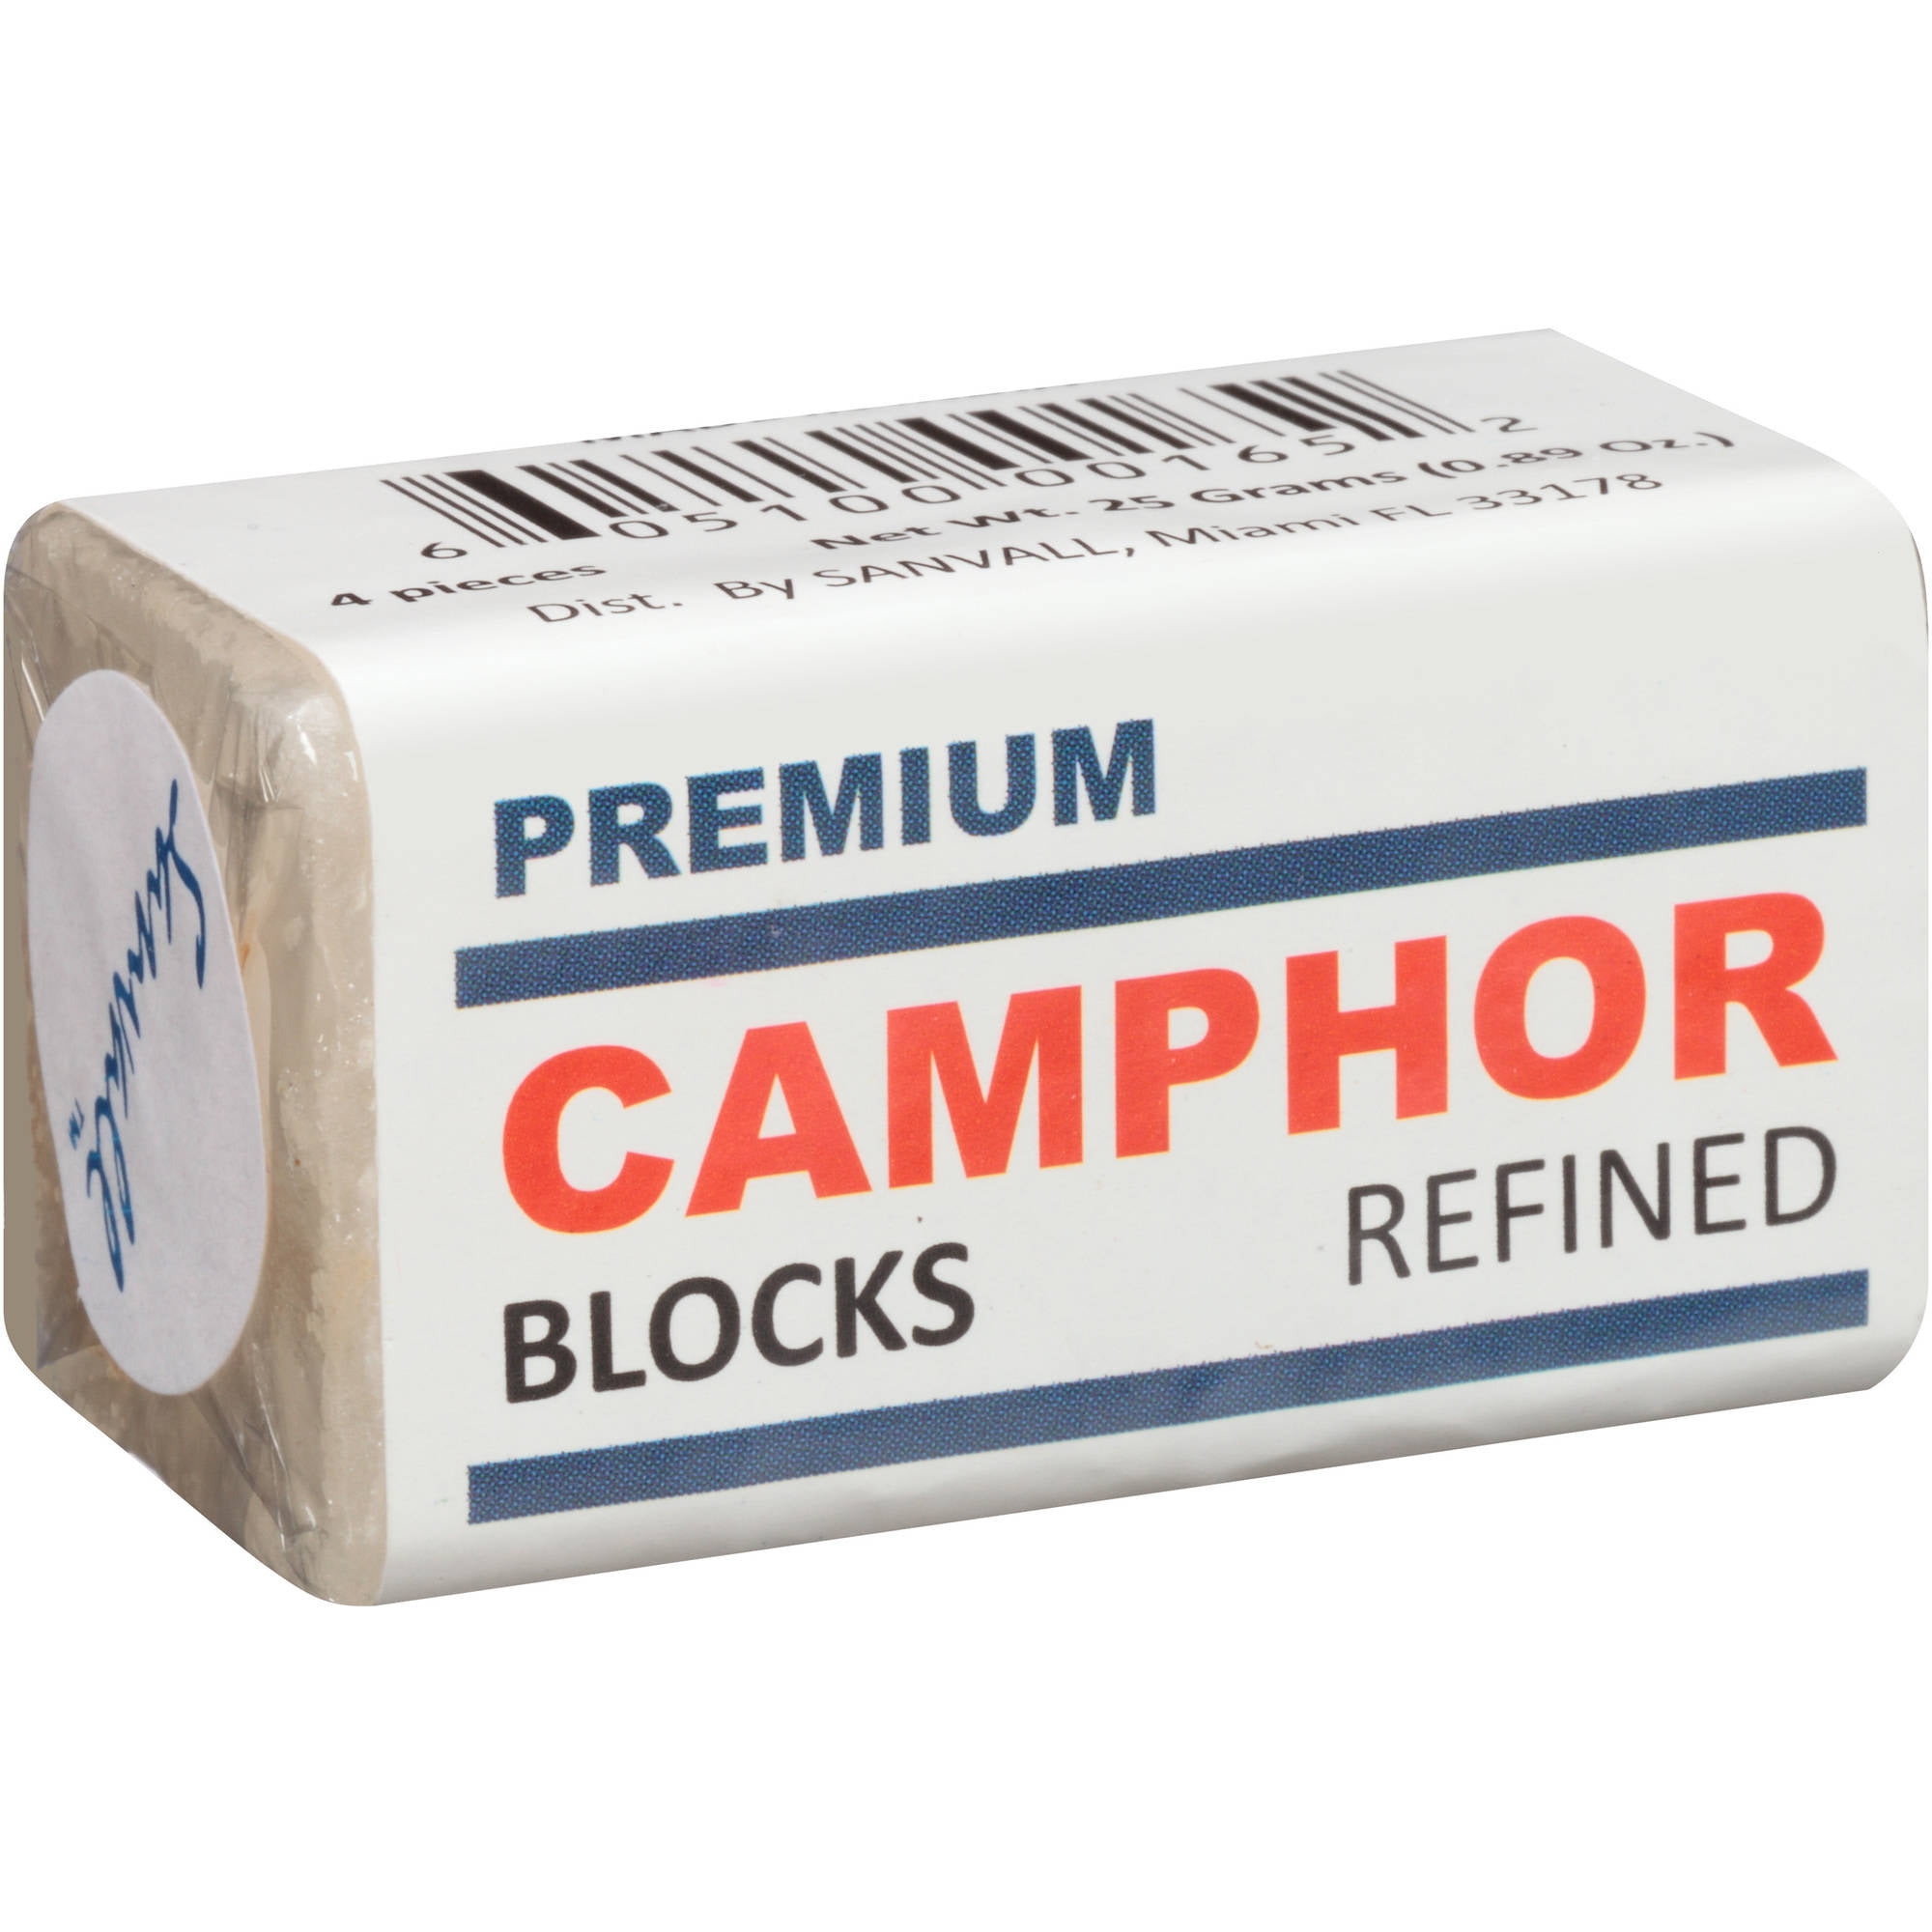 Sanar Naturals Premium Camphor Blocks, 4 Tablets Each - Refined Alcanfor,  No Residue, Bed Bug Insect Repellant, Prevent Tool Tarnish and Rust 